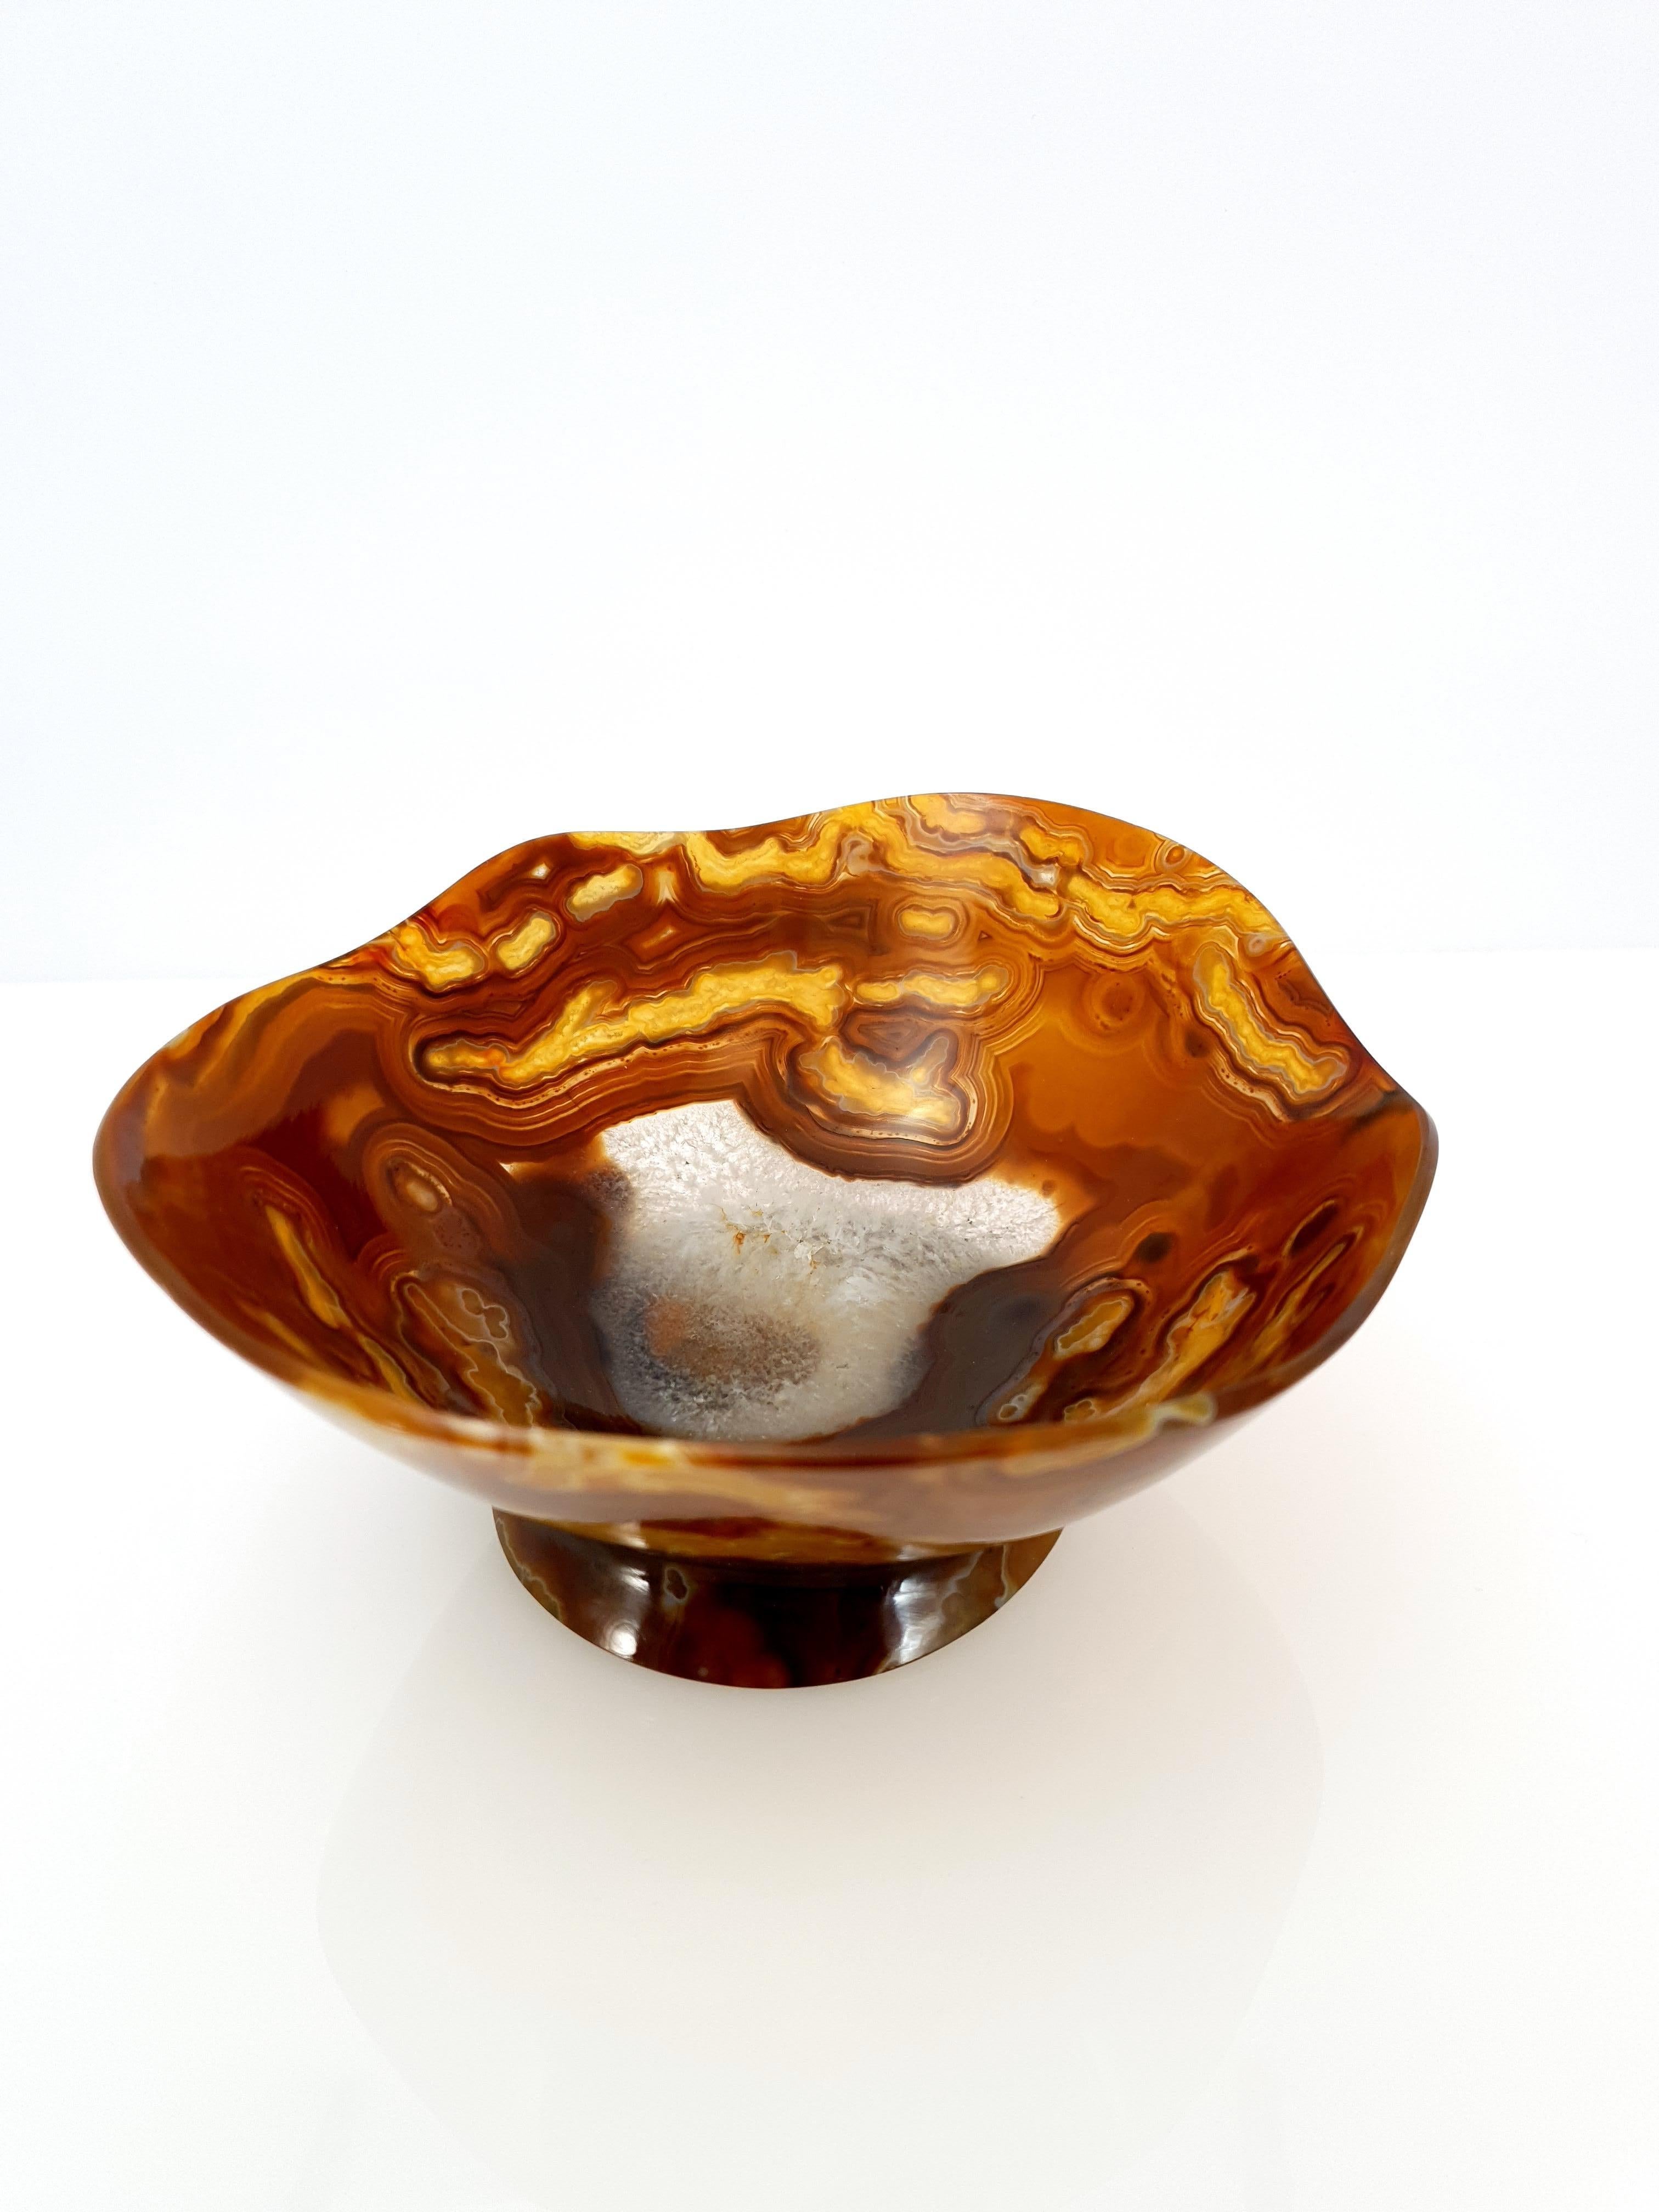 A natural handmade orange brown banded Agate Bowl with a crystalized center.
The bowl is cut so thin that the material is translucent. 

It's a great piece for decoration on a desk, vanity, or even as a special gift.
